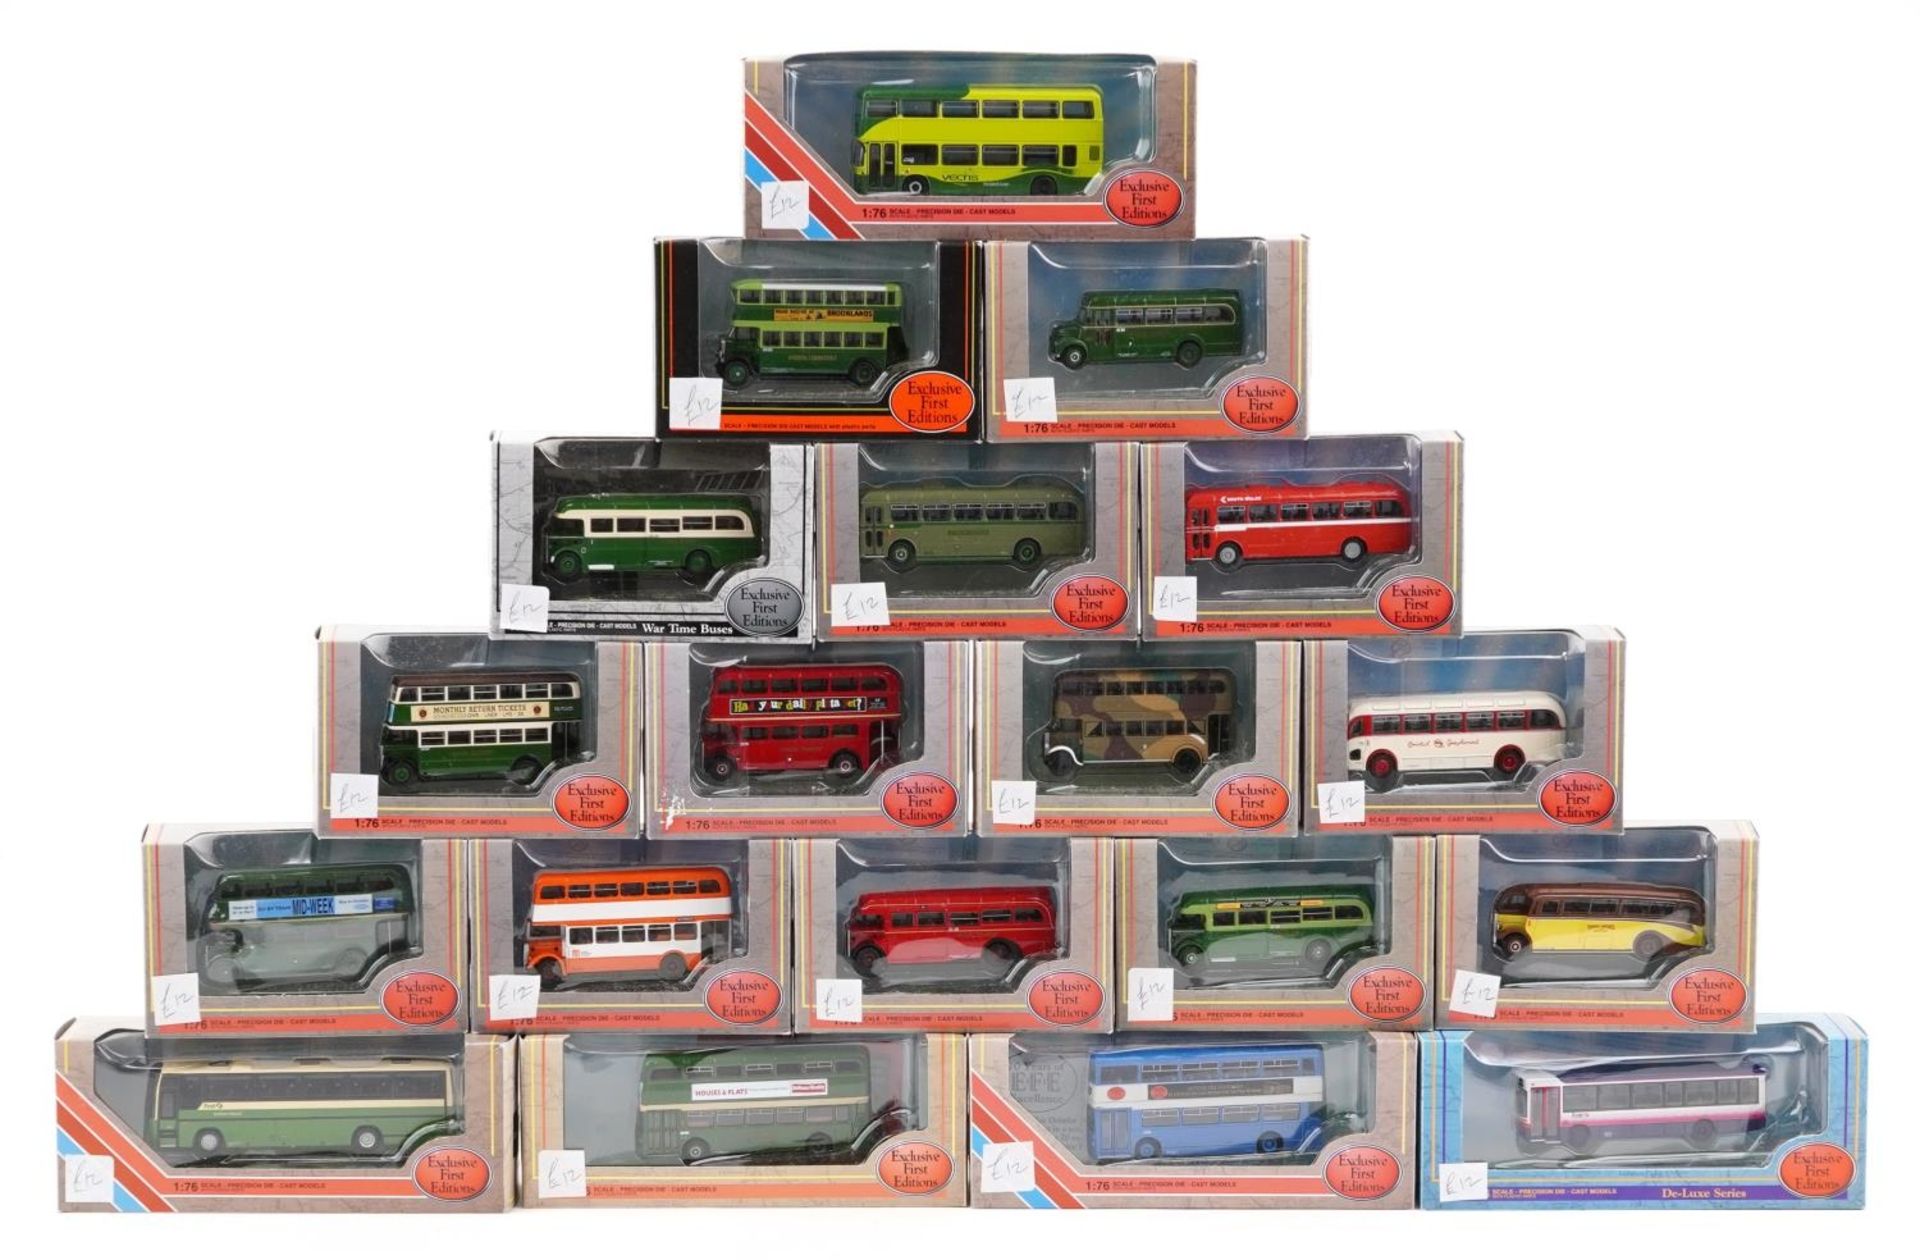 Nineteen Exclusive First Editions 1:76 scale diecast buses with boxes : For further information on